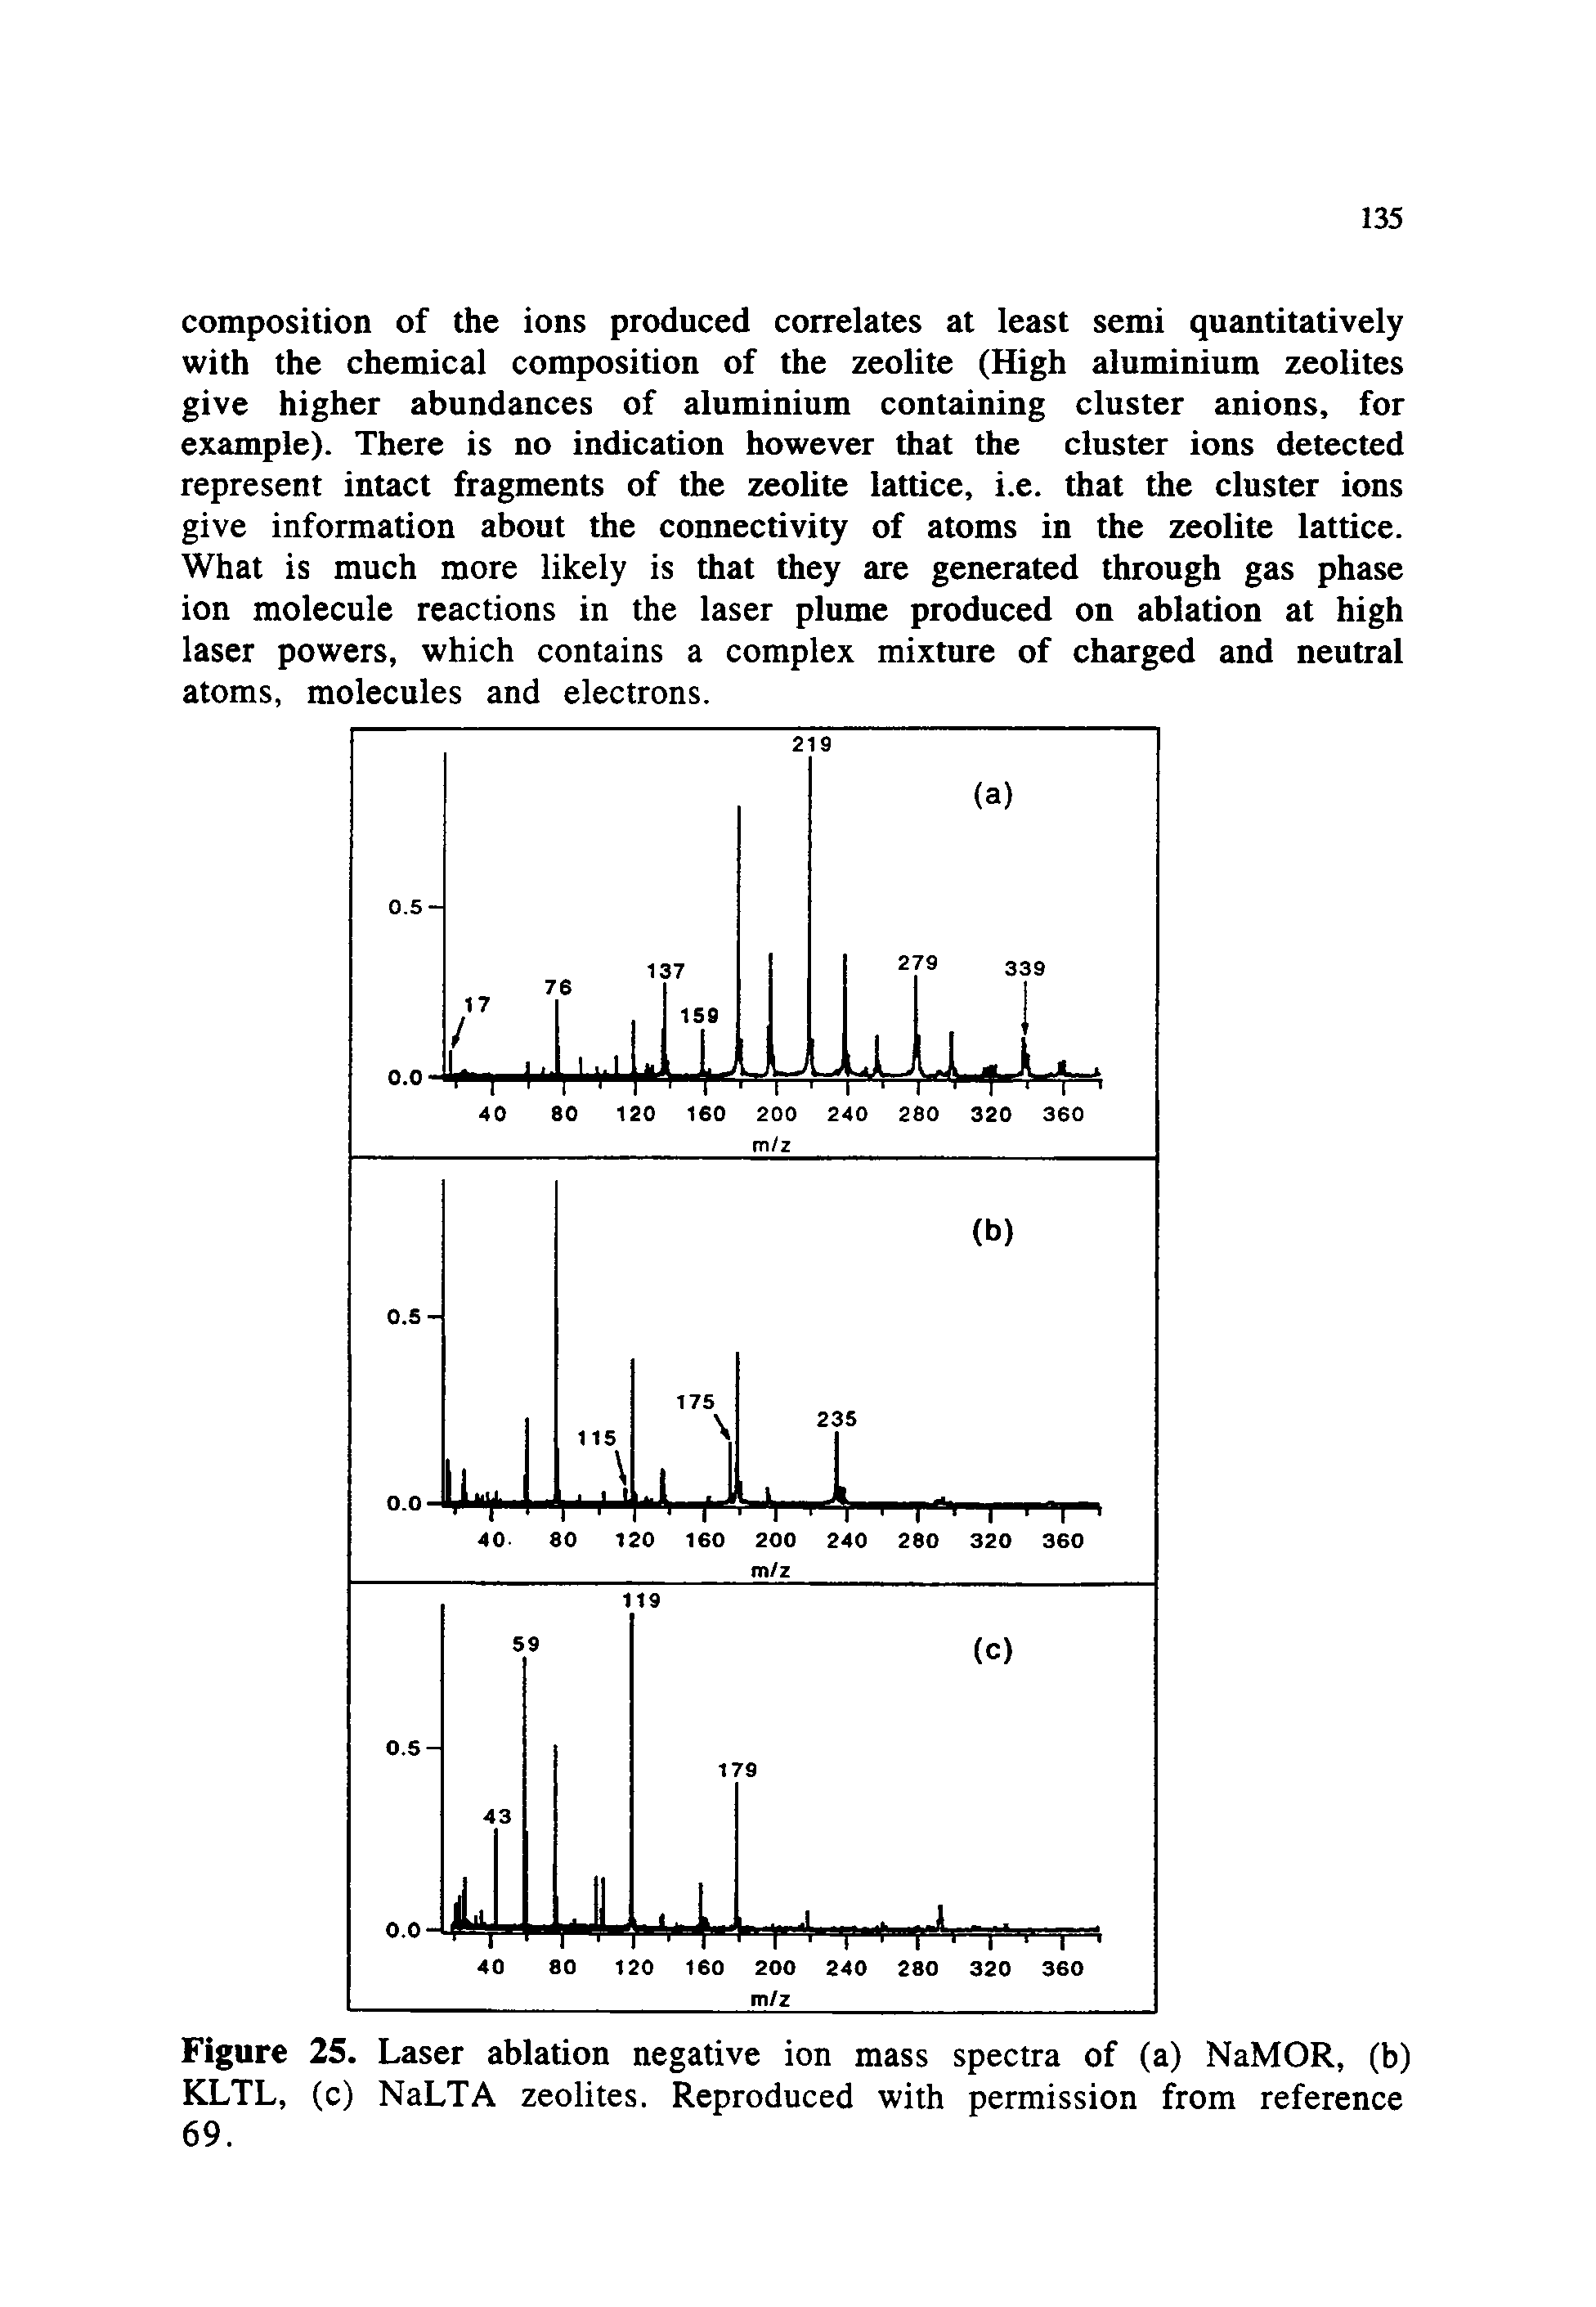 Figure 25. Laser ablation negative ion mass spectra of (a) NaMOR, (b) KLTL, (c) NaLTA zeolites. Reproduced with permission from reference 69.